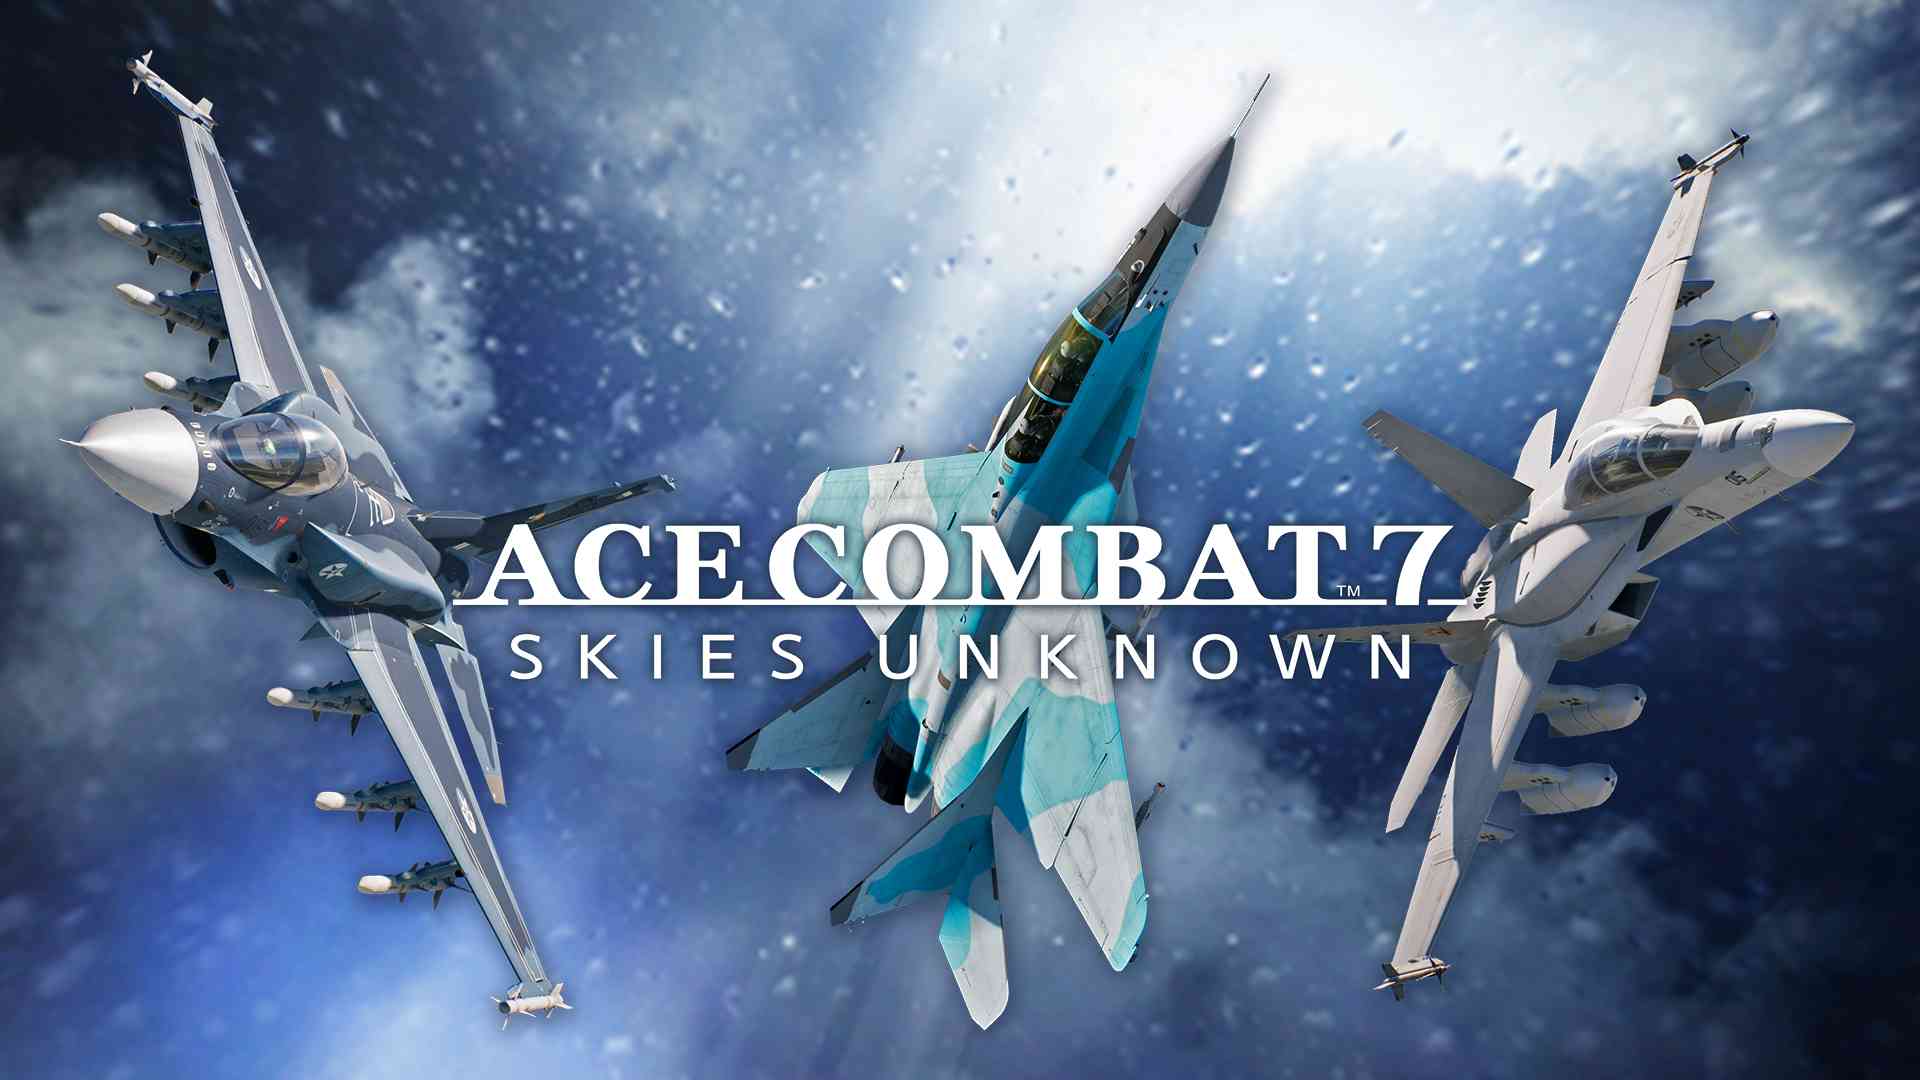 ACE COMBAT™7: SKIES UNKNOWN - Cutting-Edge Aircraft Series Set